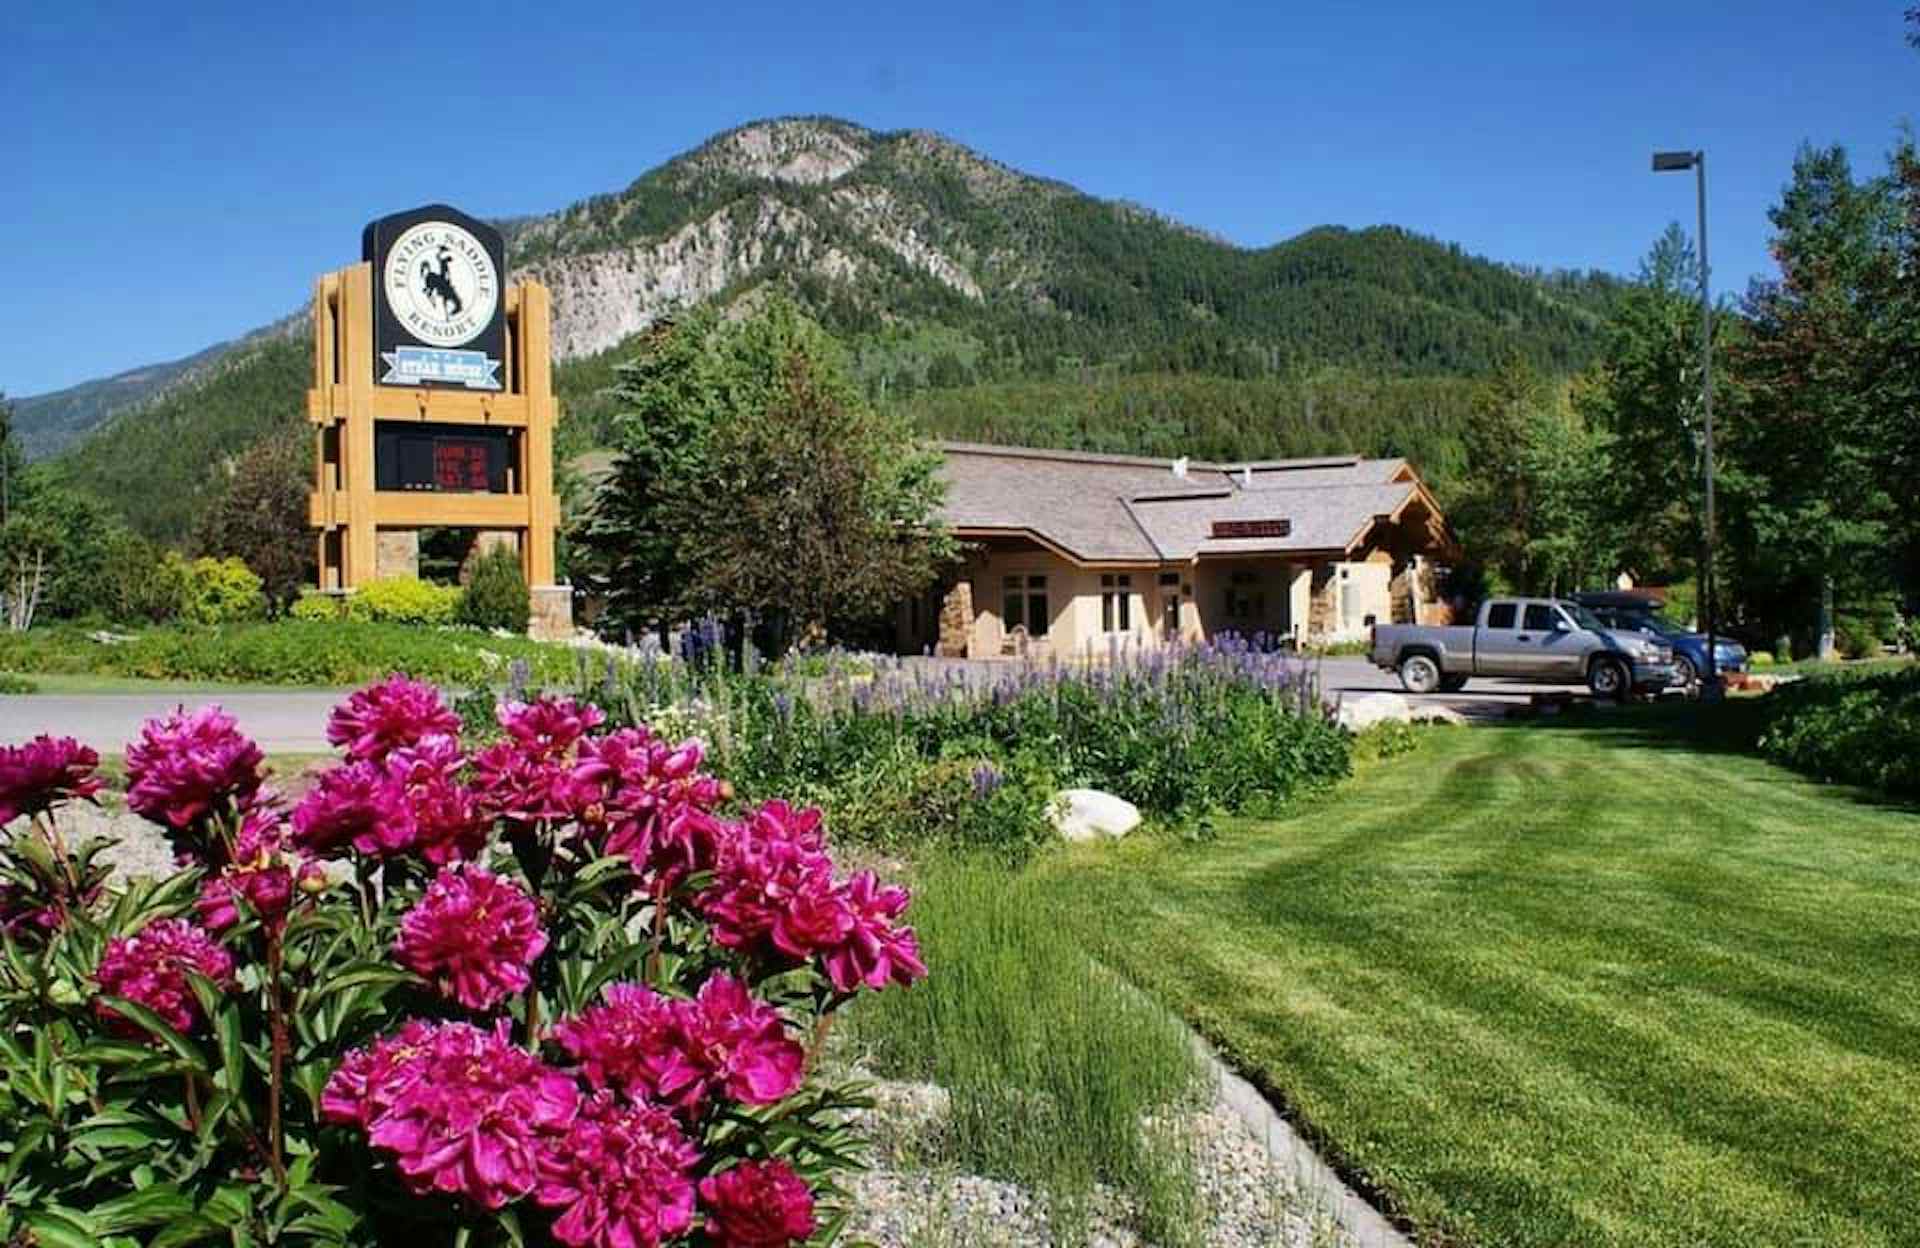 Warm summer day at the Flying Saddle Resort of Alpine, Wyoming within the Yellowstone Teton Territory.